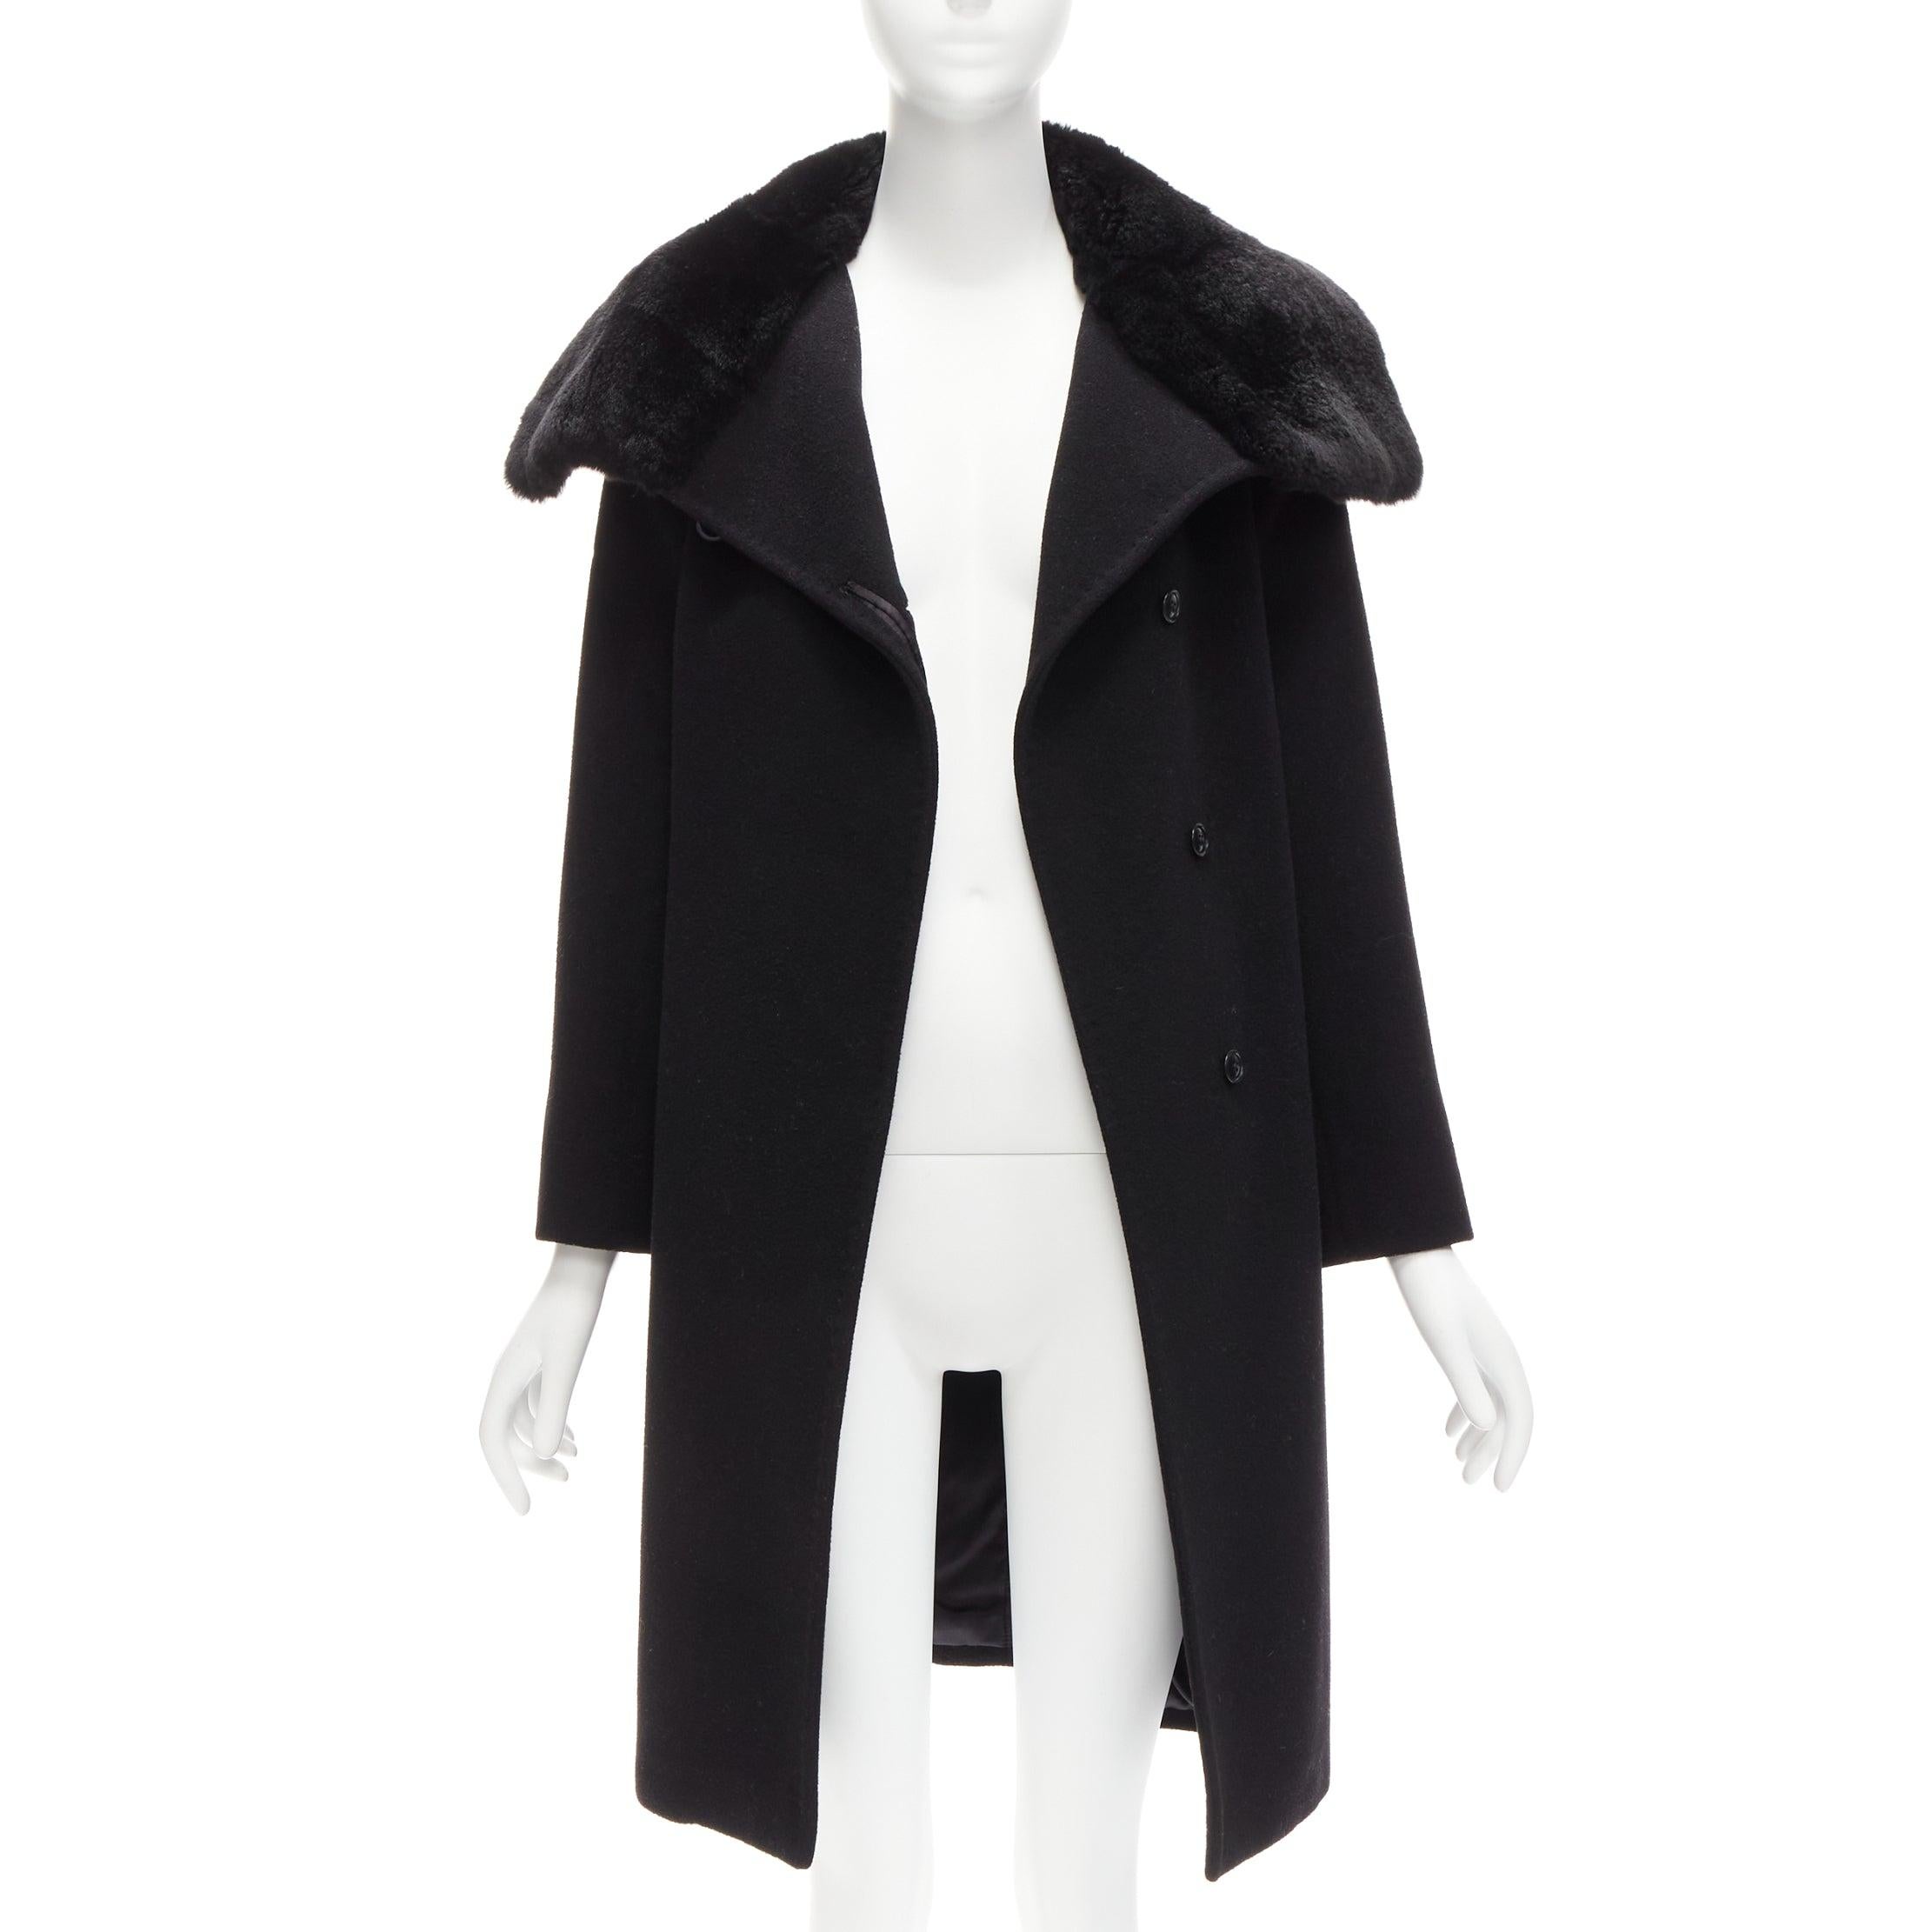 MAX MARA black fur collar virgin wool cashmere belted coat IT38 XS
Reference: TGAS/D00955
Brand: Max Mara
Material: Virgin Wool, Cashmere, Fur
Color: Black
Pattern: Solid
Closure: Button
Lining: Black Fabric
Extra Details: Hidden buttons. Single